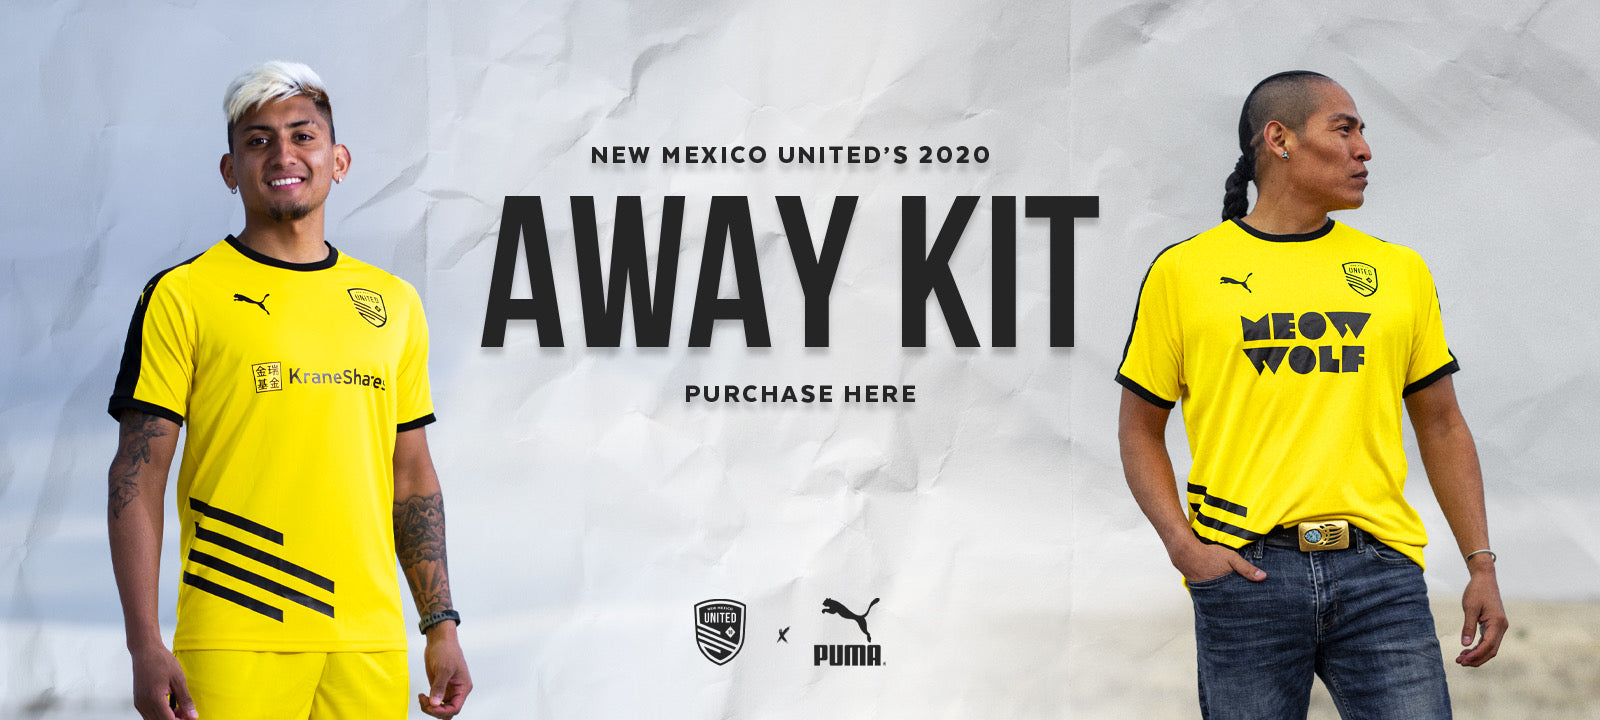 New Mexico United Team Store